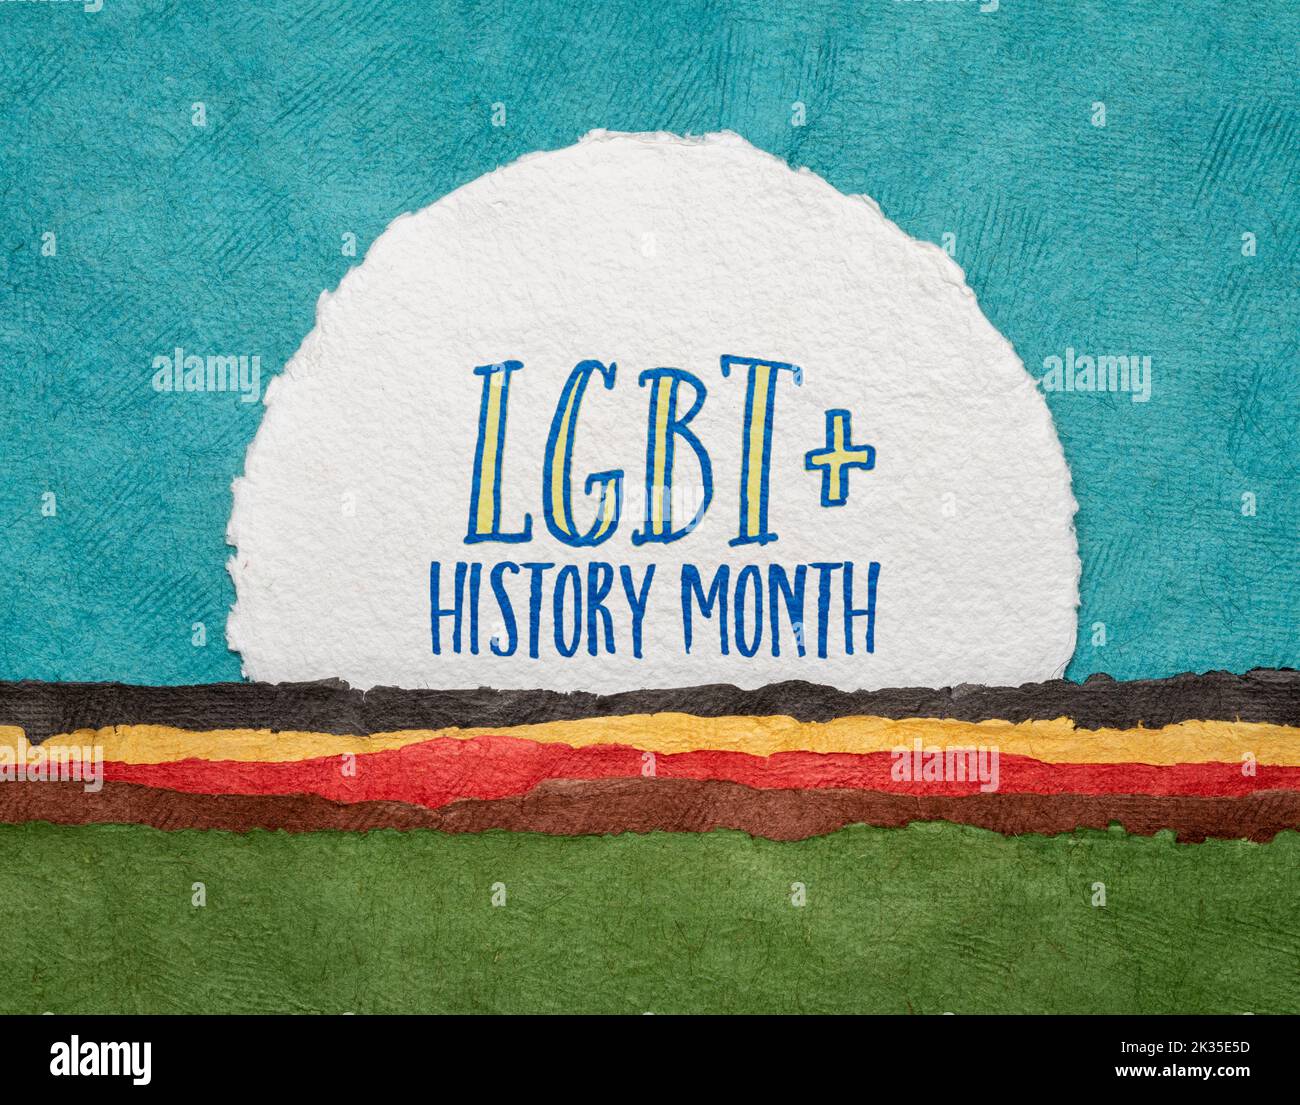 LGBT History Month - handwriting on a handmade watercolor paper against abstract paper landscape, reminder of cultural and heritage event Stock Photo